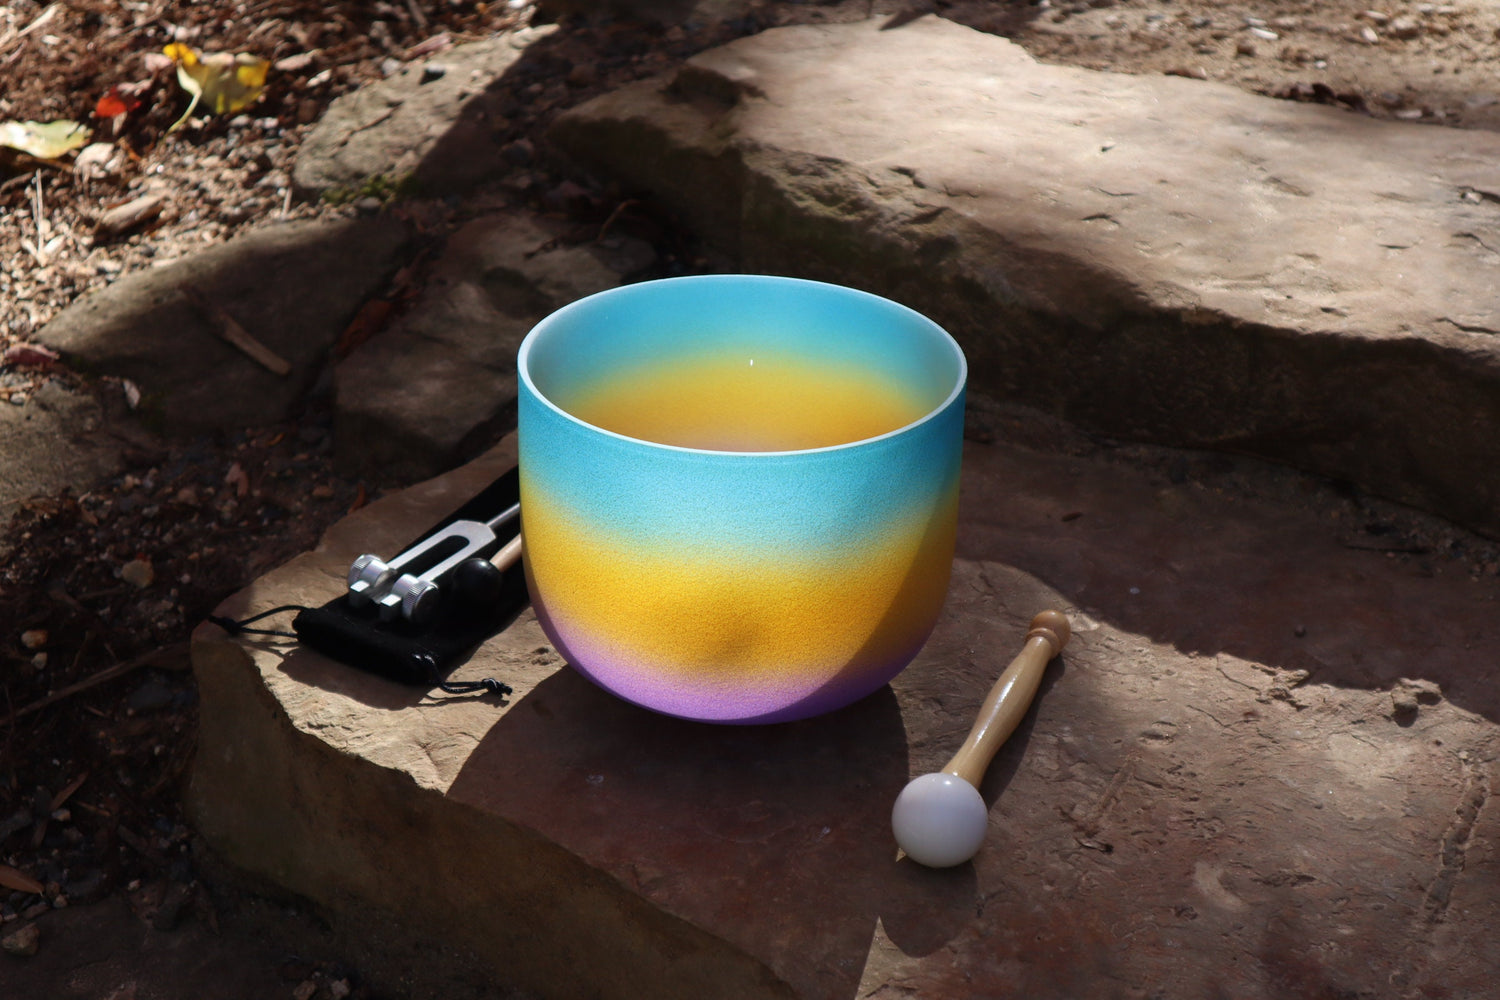 Agave - 432Hz 8" Throat Chakra G Note Crystal Singing Bowl - Mallet, Padded Carry Case, 528 Hz Solfeggio Tuning Fork